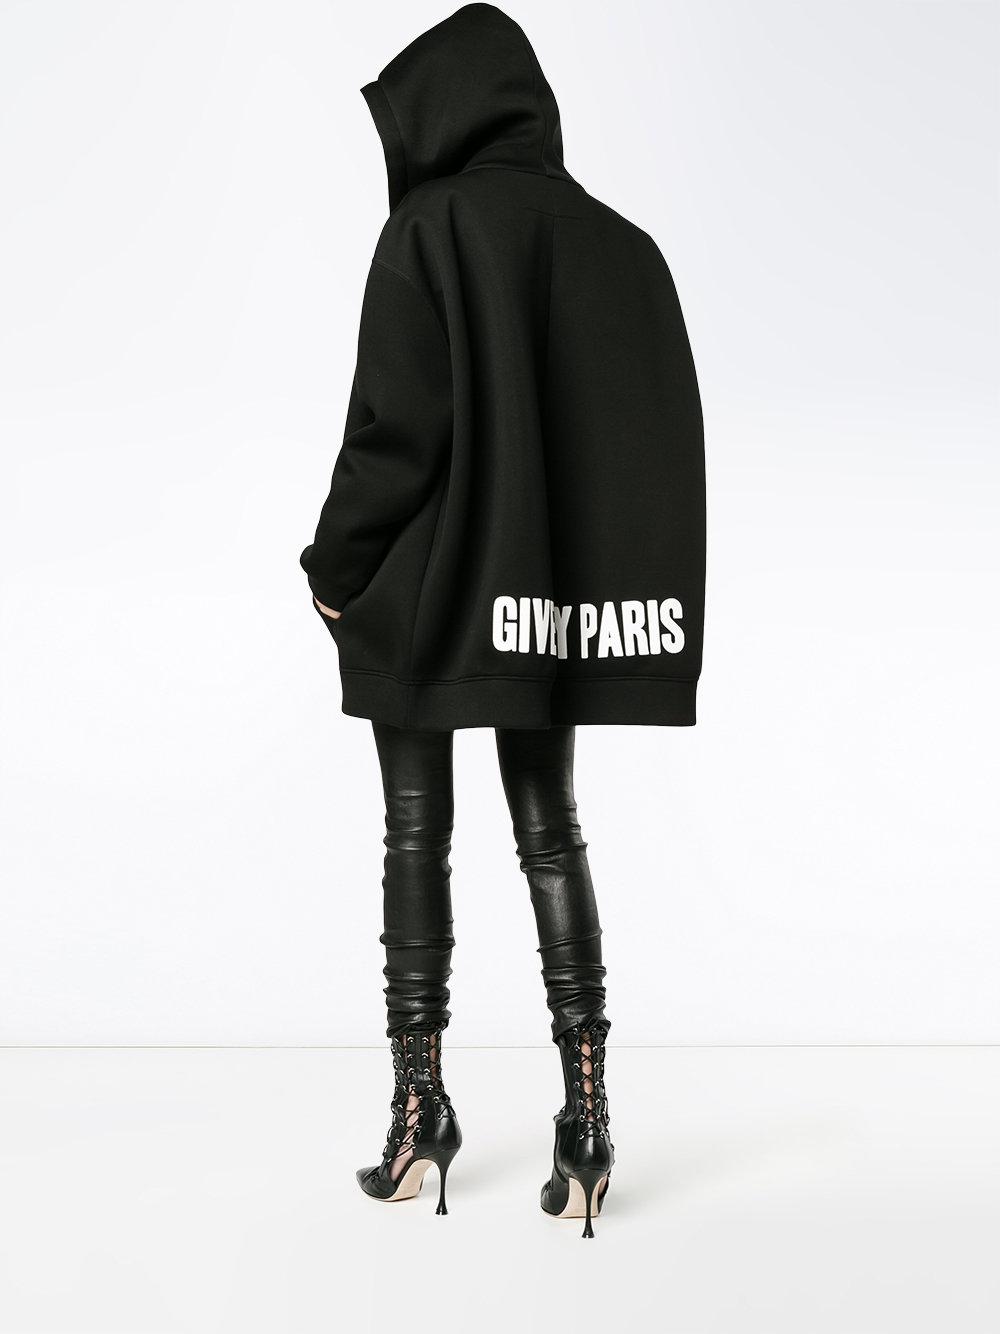 oversized givenchy hoodie